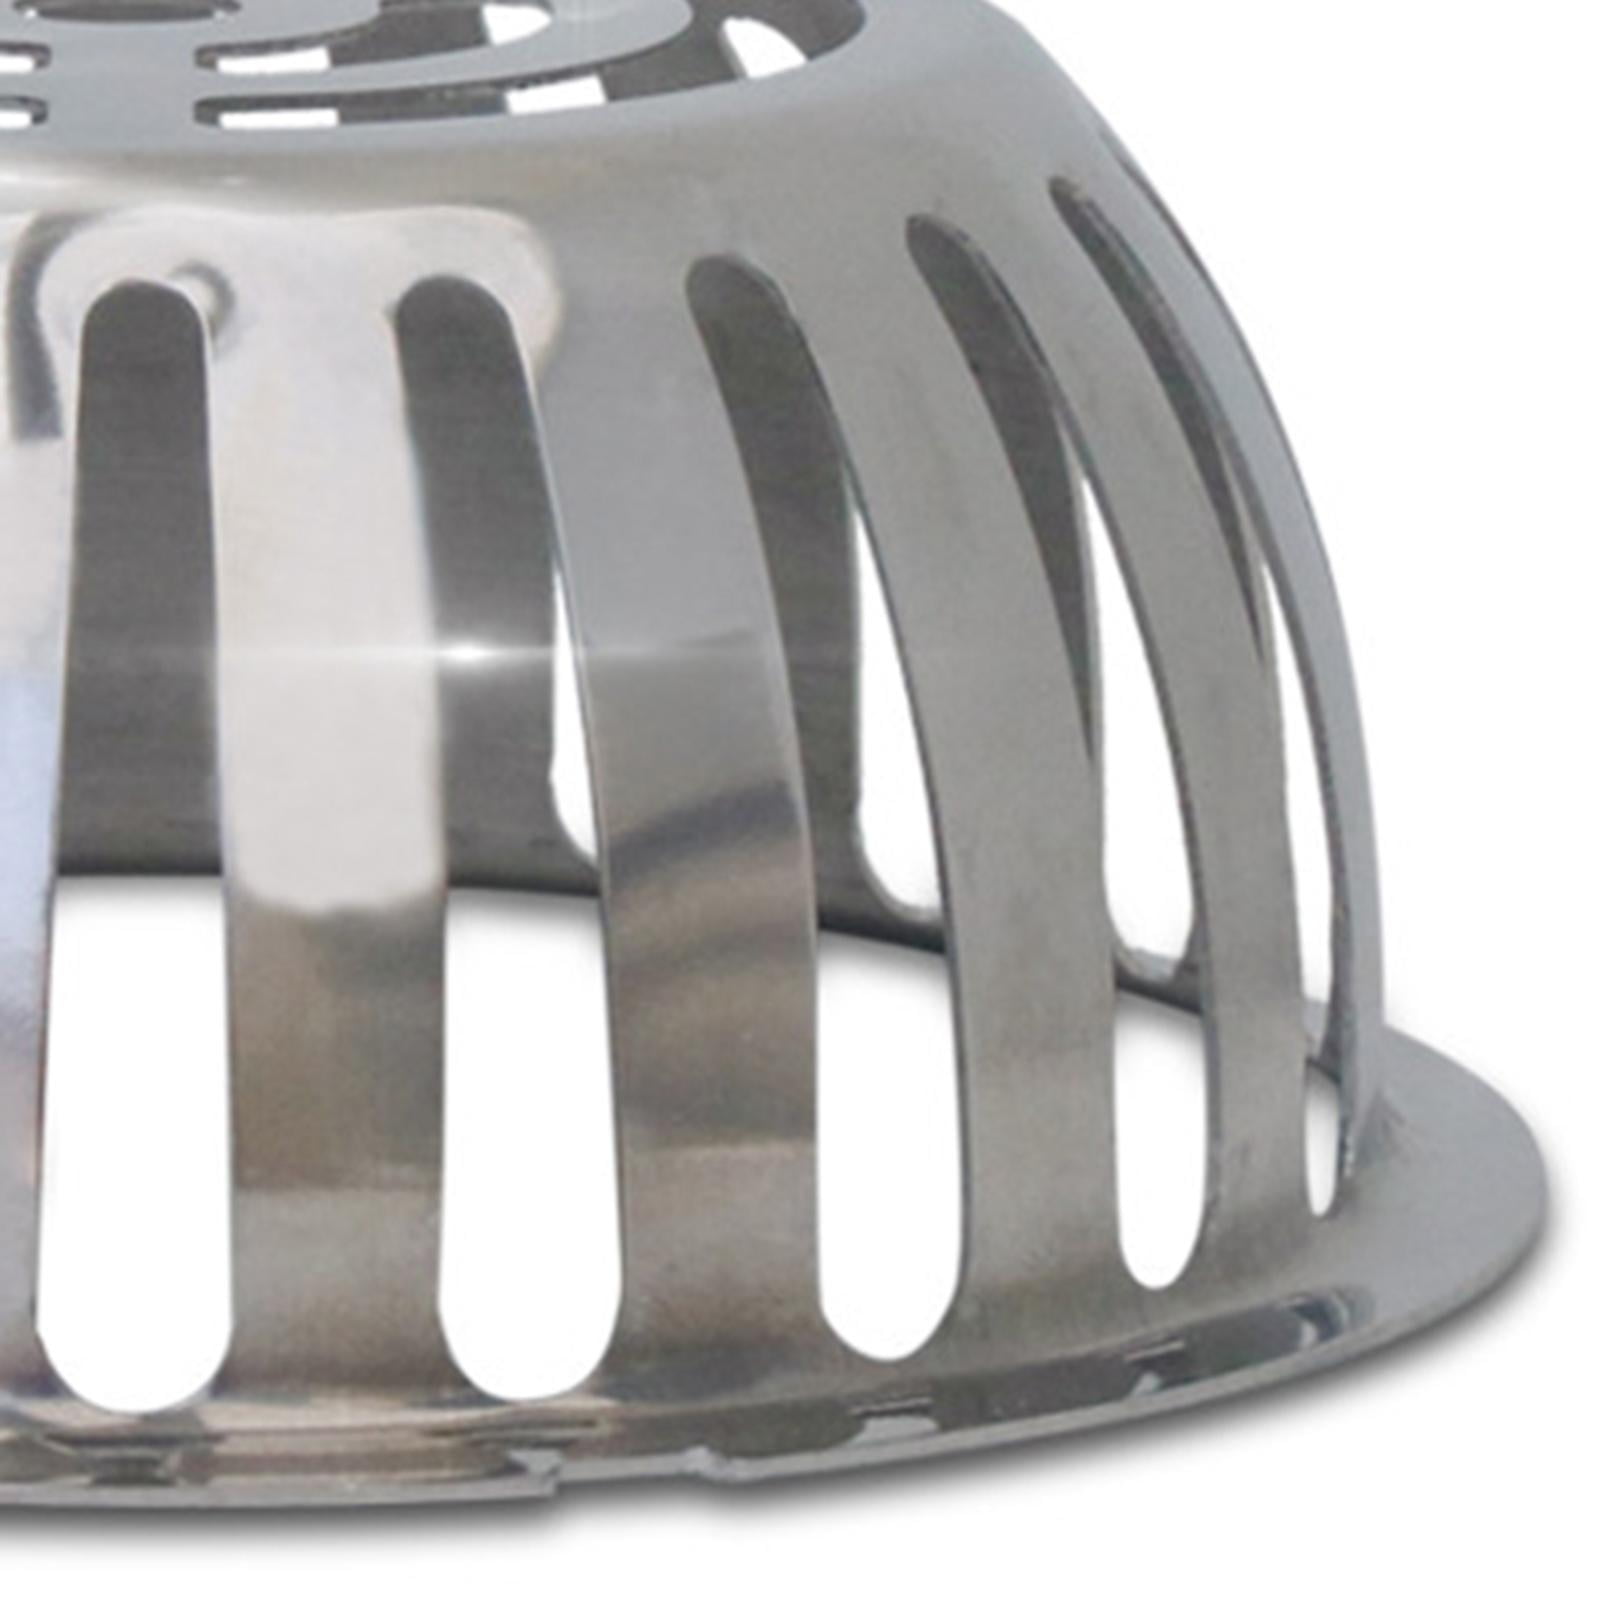 TubShroom 1.5-in Stainless steel Strainer dome cover in the